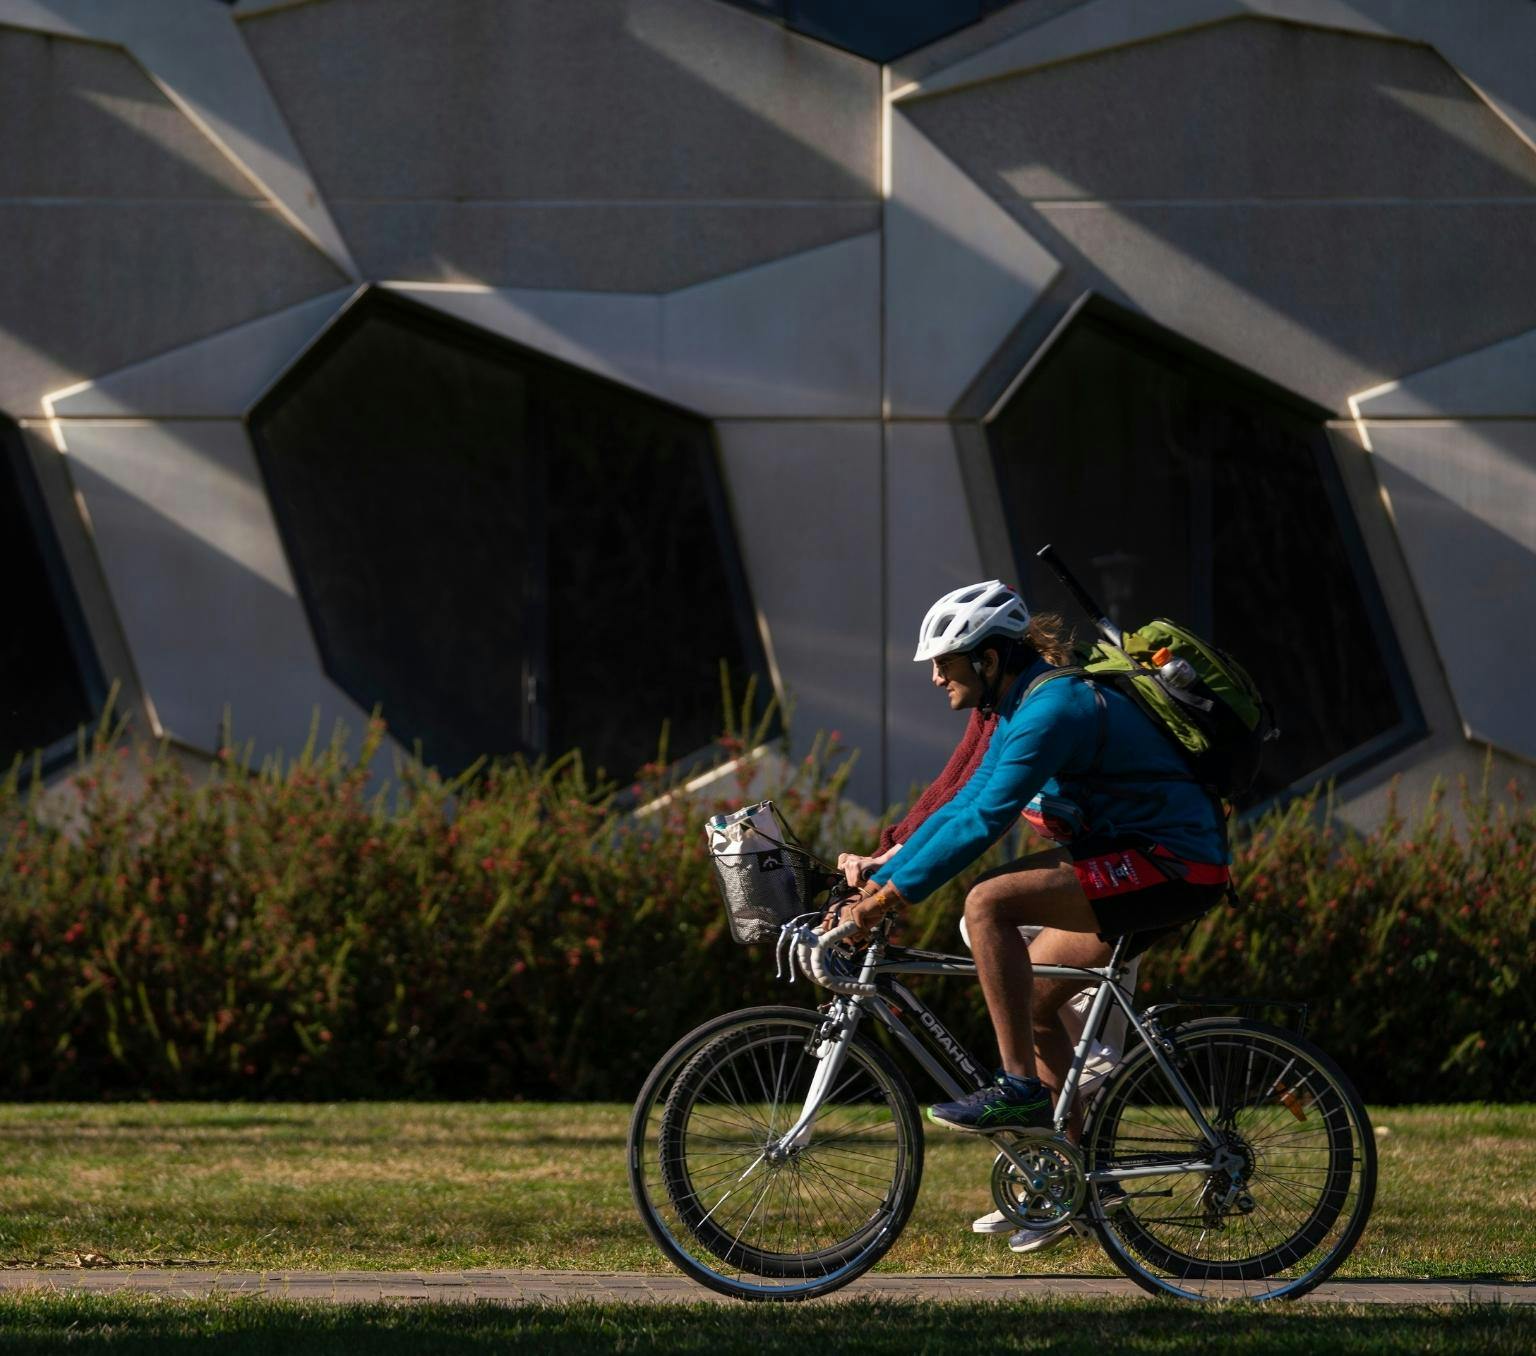 Cyclist rides a bike along a path in front of a geometric building.